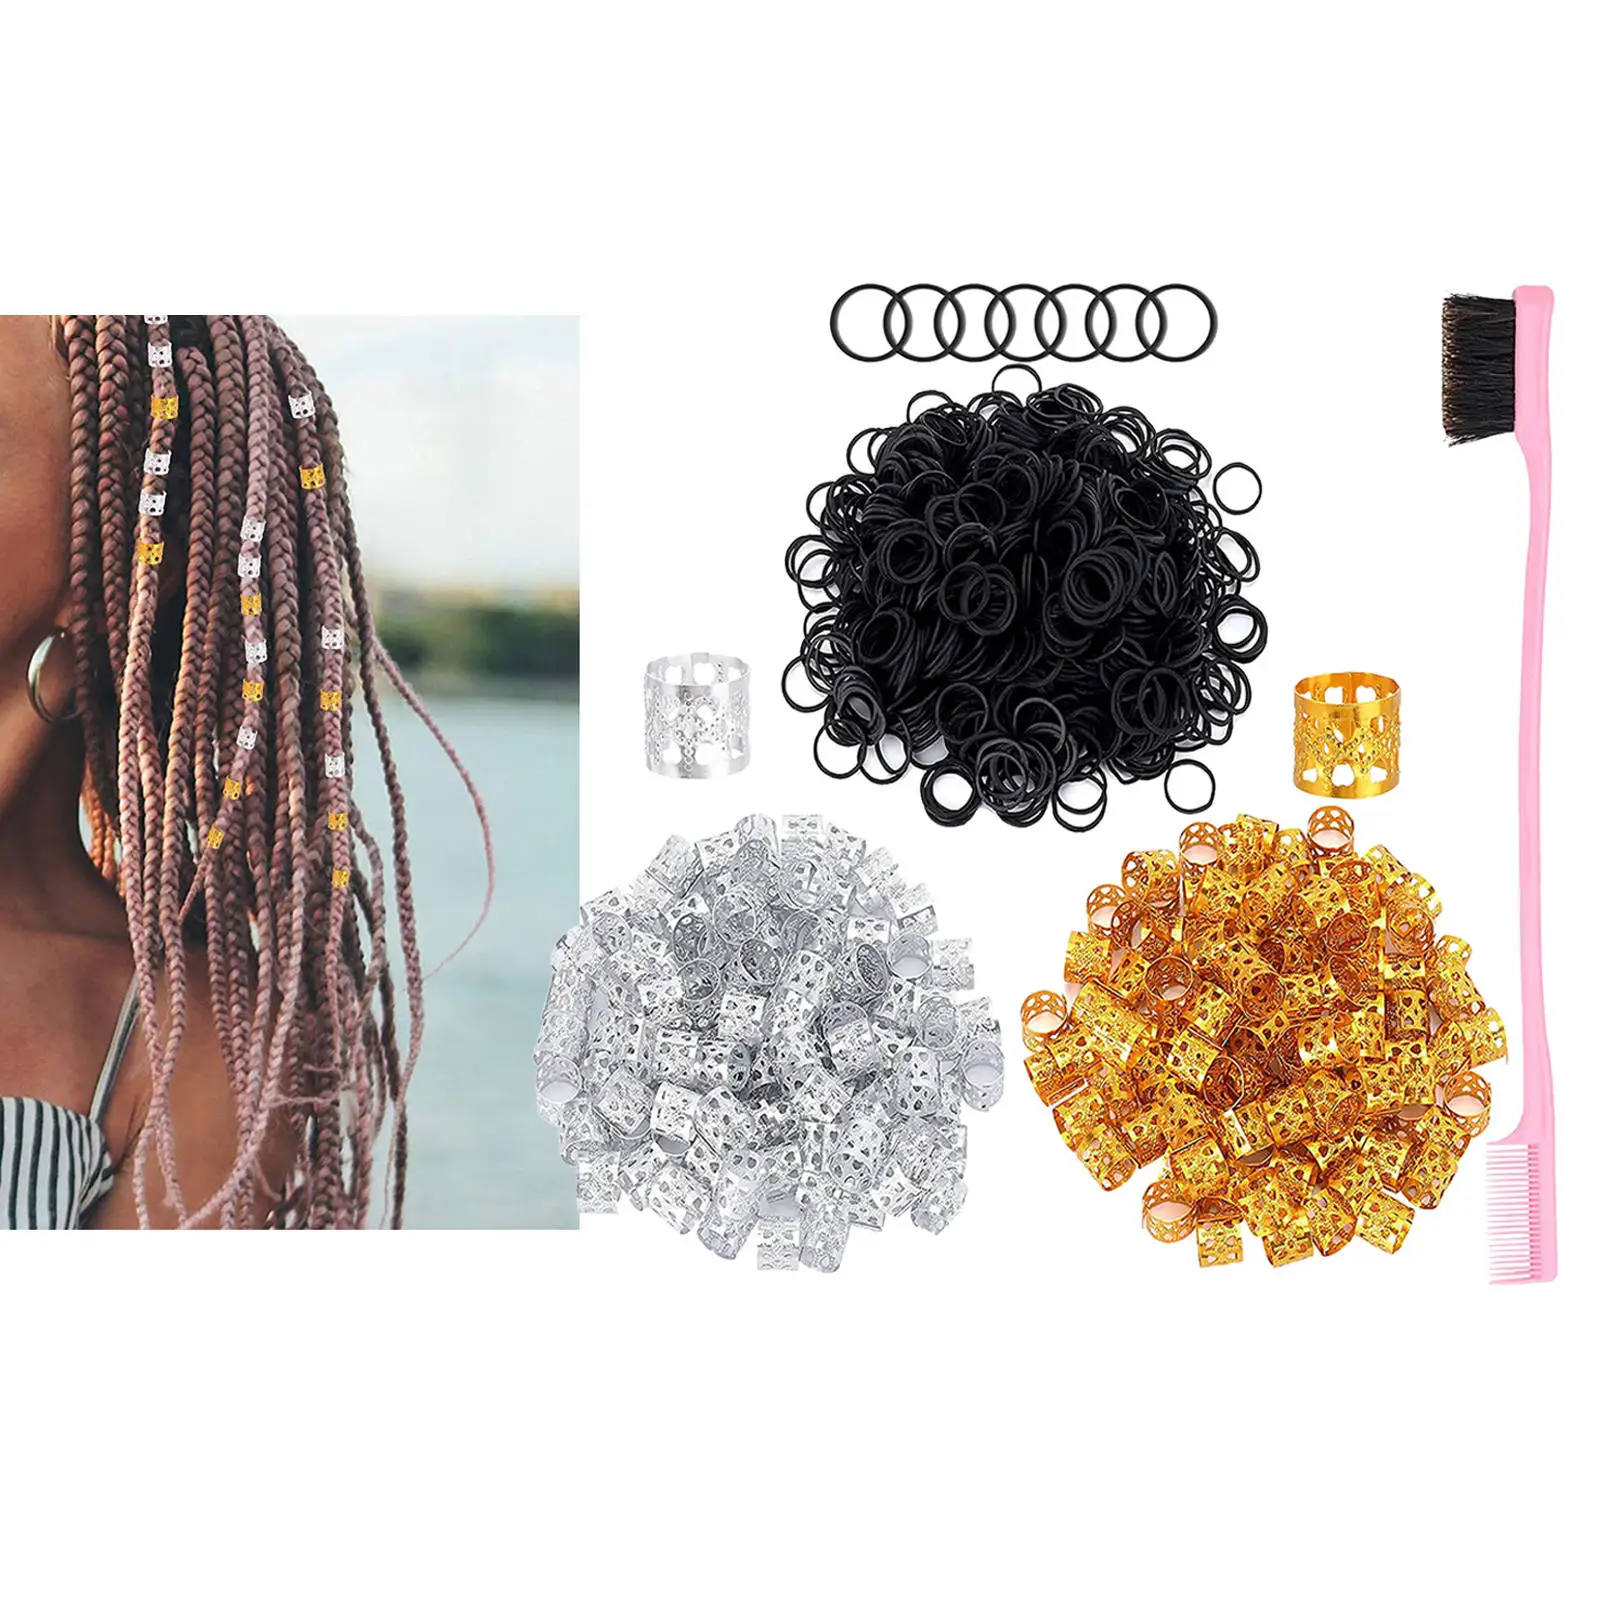 1201Pcs Dreadlock Beads Black Rubber Bands Accessory with Double-Ended Eyebrow Brush Jewelry Metal Hair Tube Beads for Braids